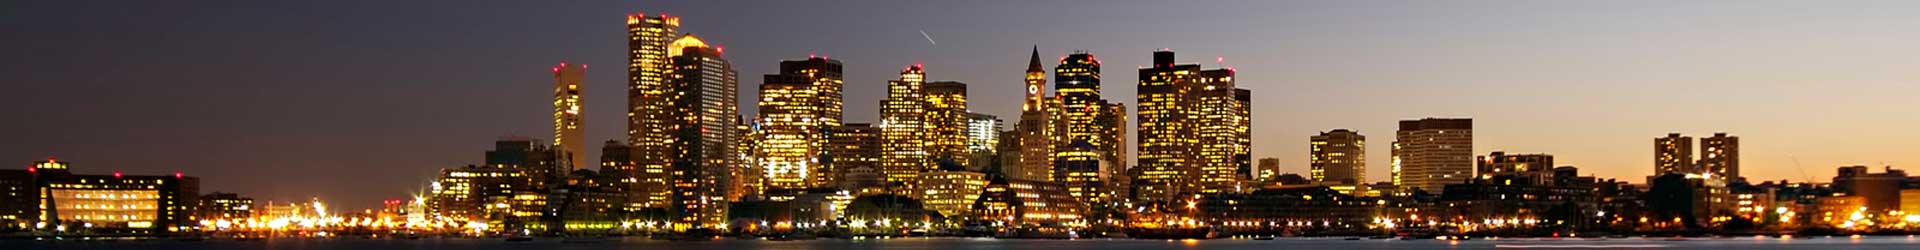 Boston skyline.  Linkwell Services for Boston area small and medium organizations